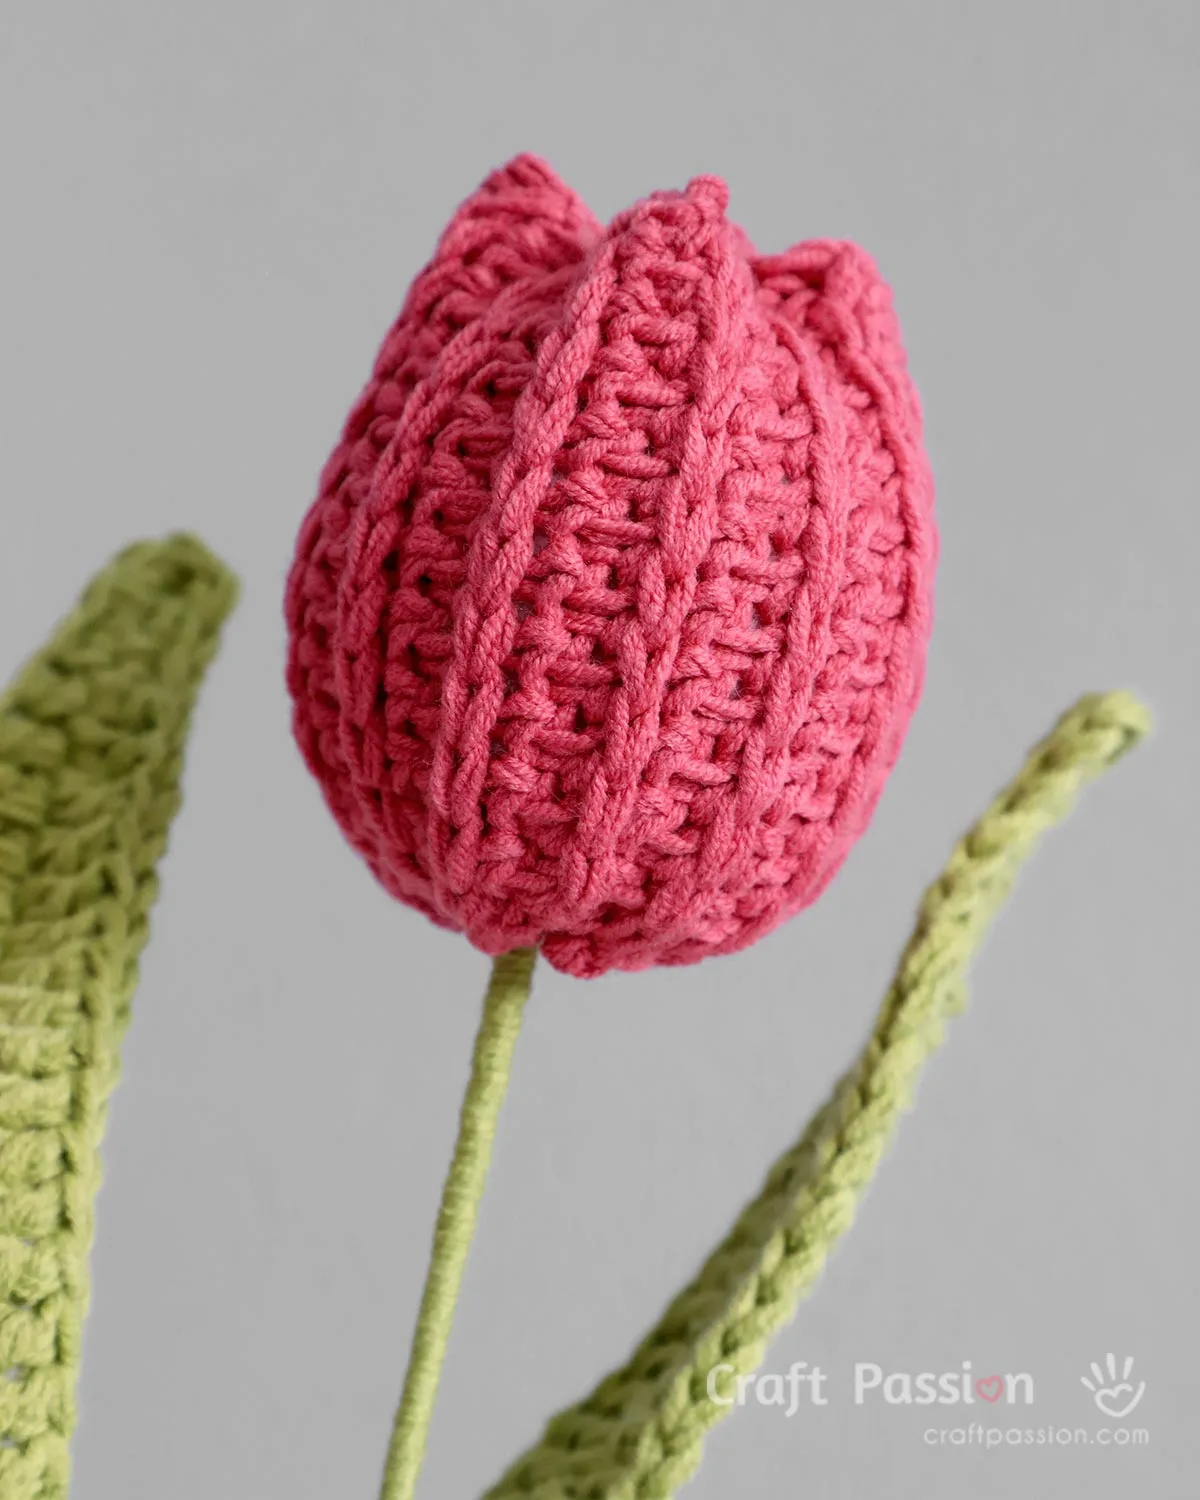 Free crochet tulip pattern to make heartwarming gifts for friends and loved ones. It's an easy crochet pattern for beginners and crocheter of all skill level.